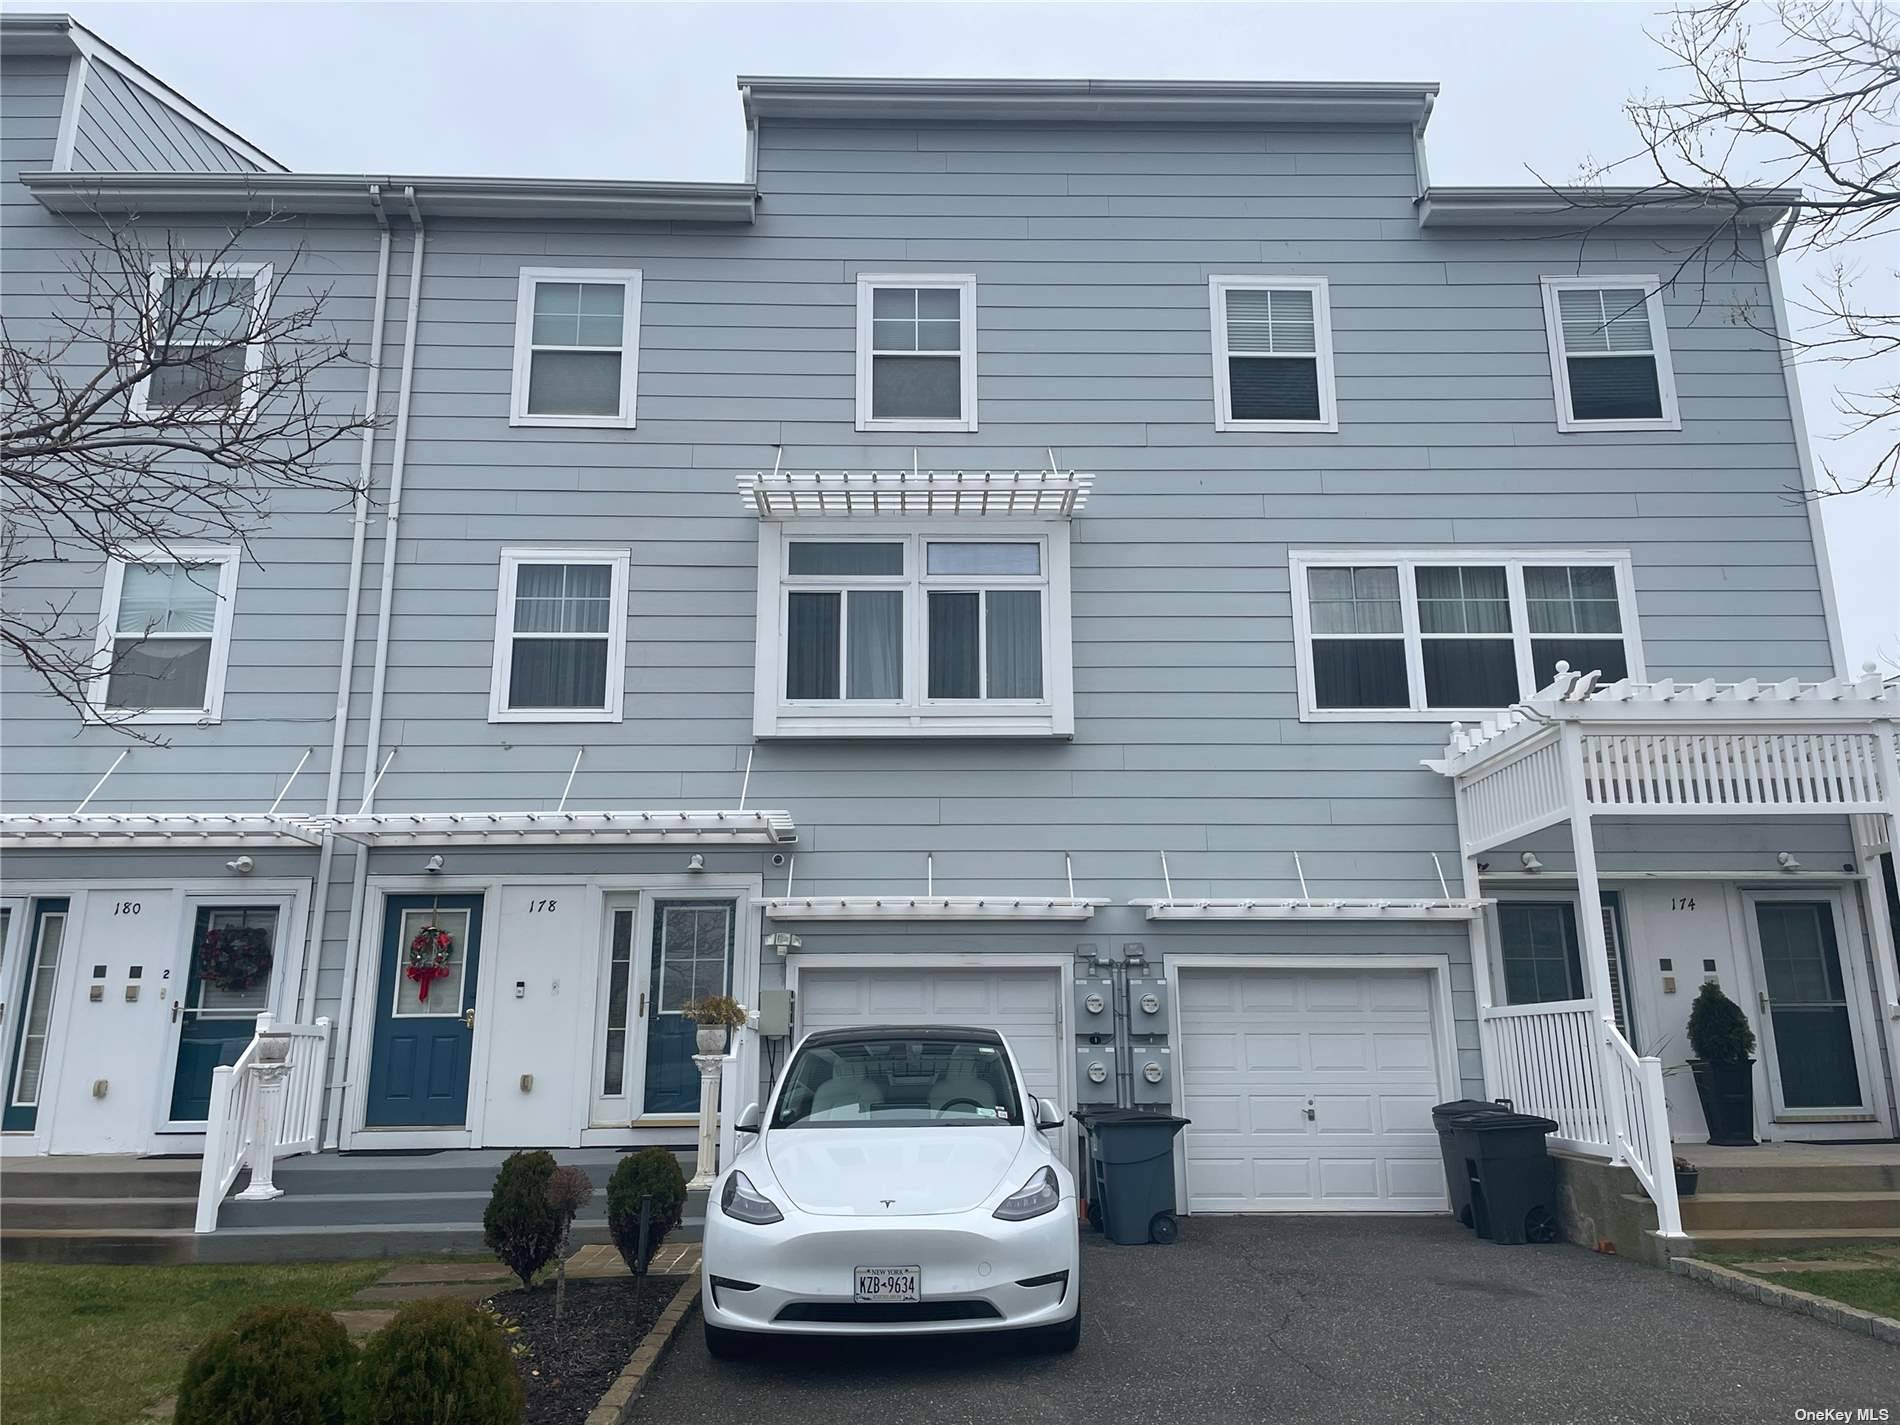 Experience luxurious living in this fully updated duplex owner's unit located in Arverne, NY.